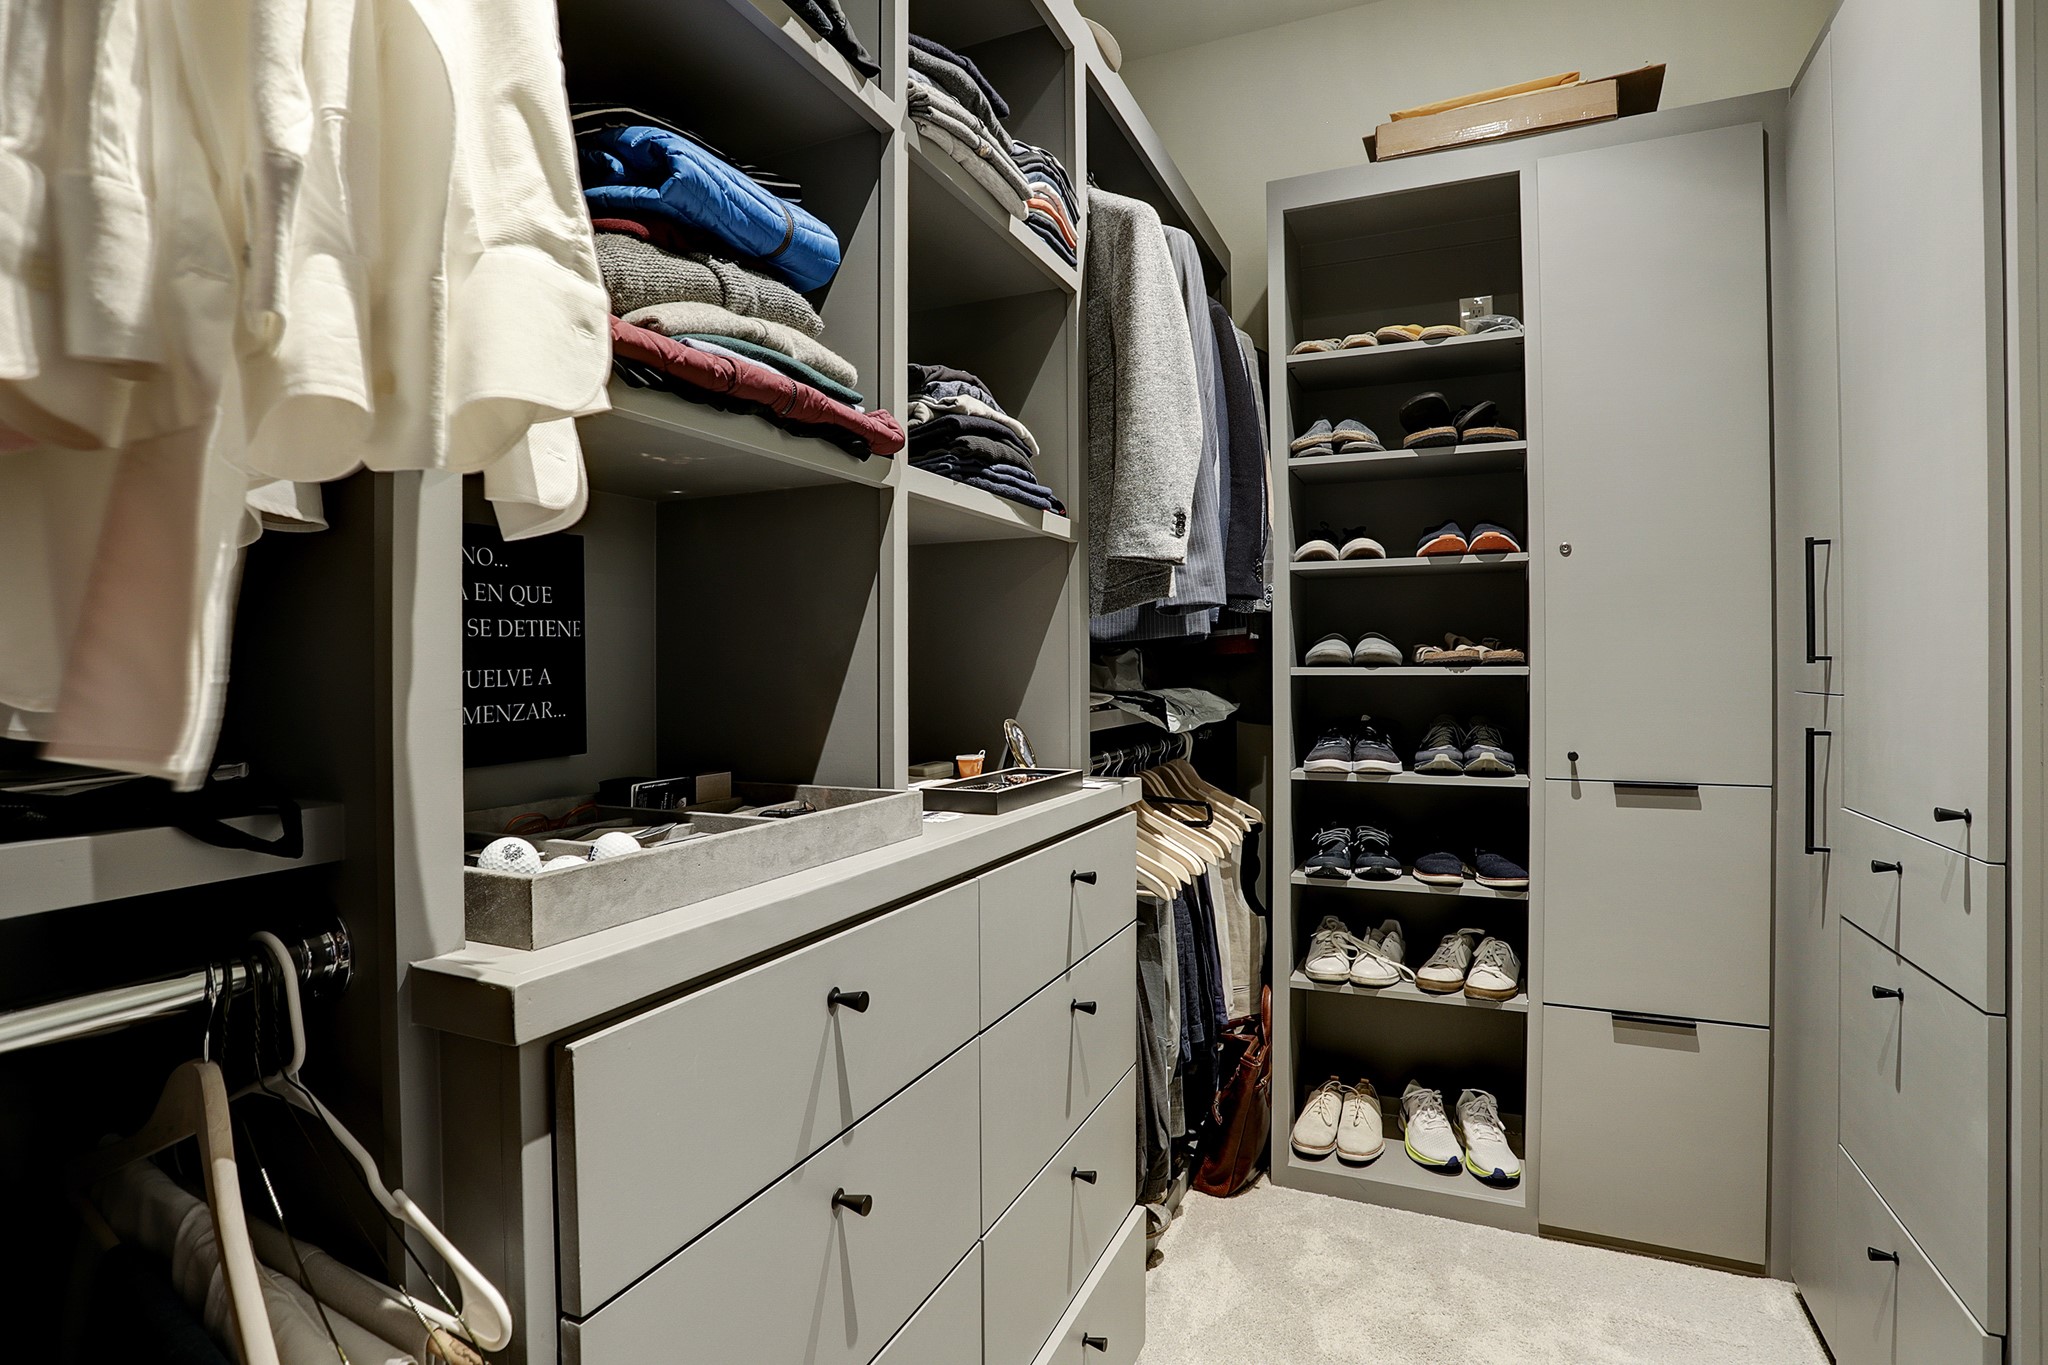 The CUSTOMIZED WALK-IN CLOSET also has additional storage cabinets and plush carpeting.